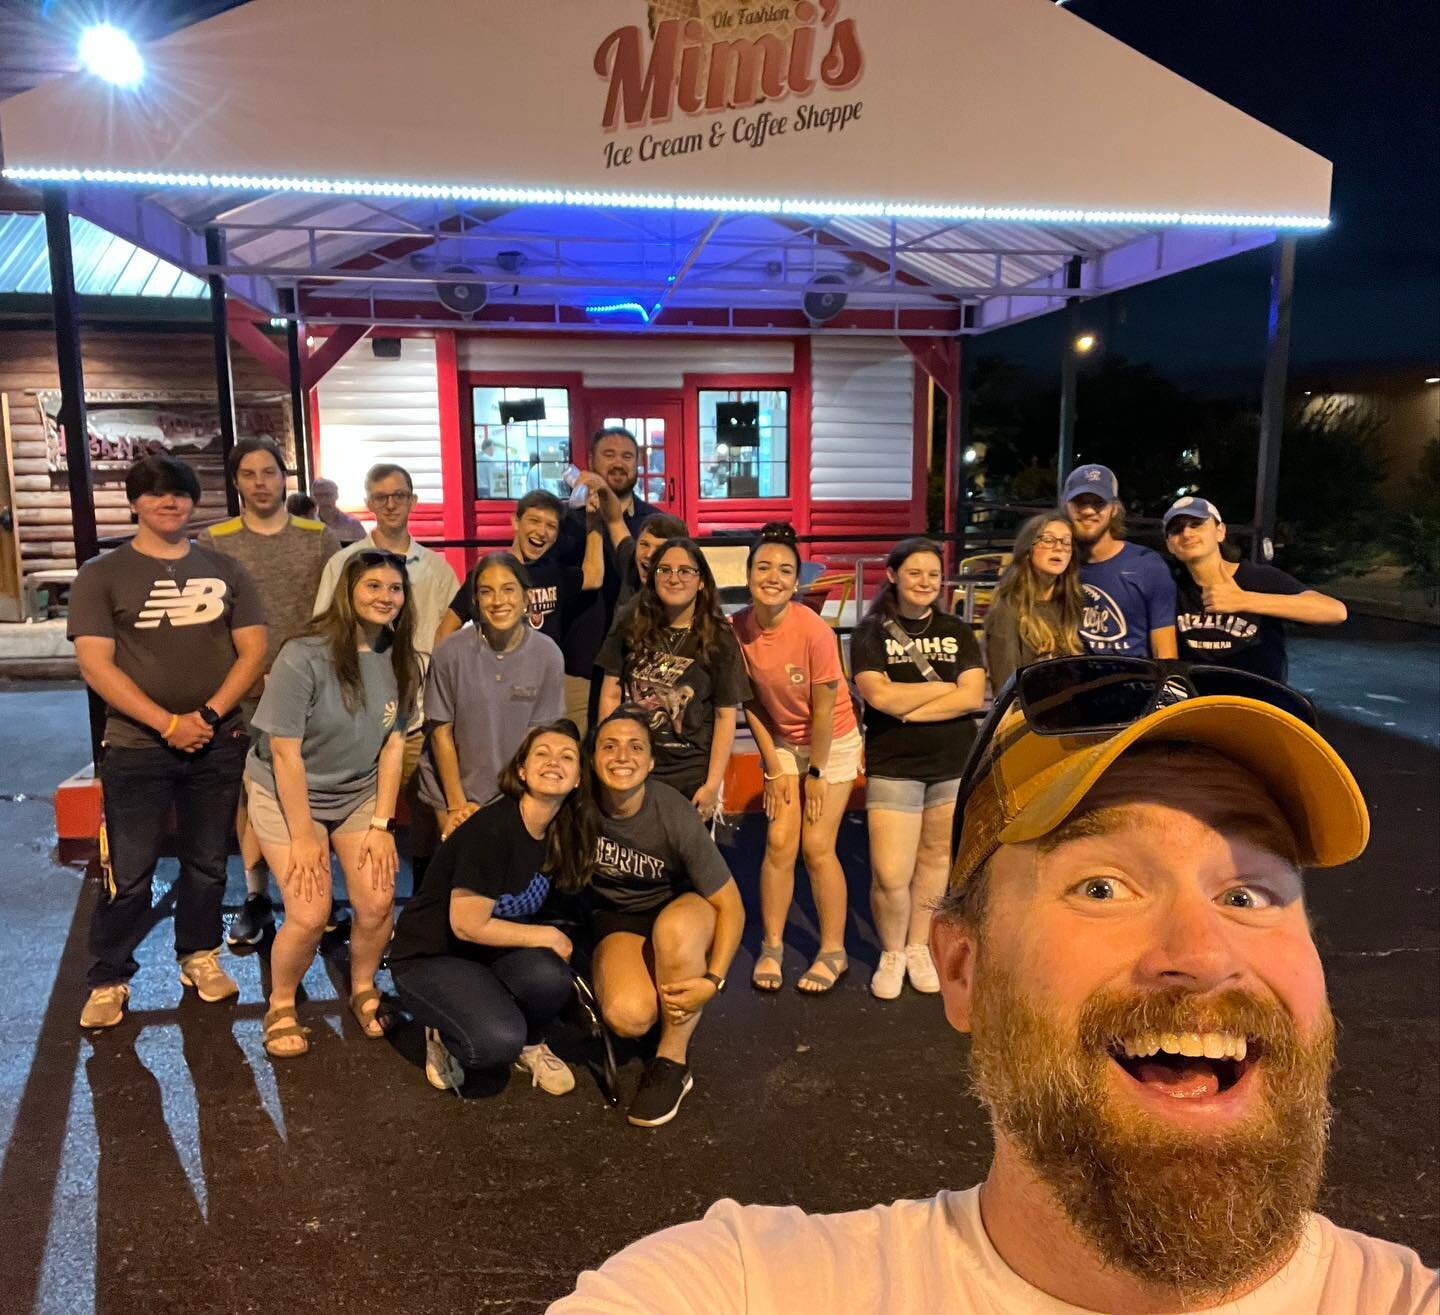 Great night out with the high school crew!  #whfbcstudents